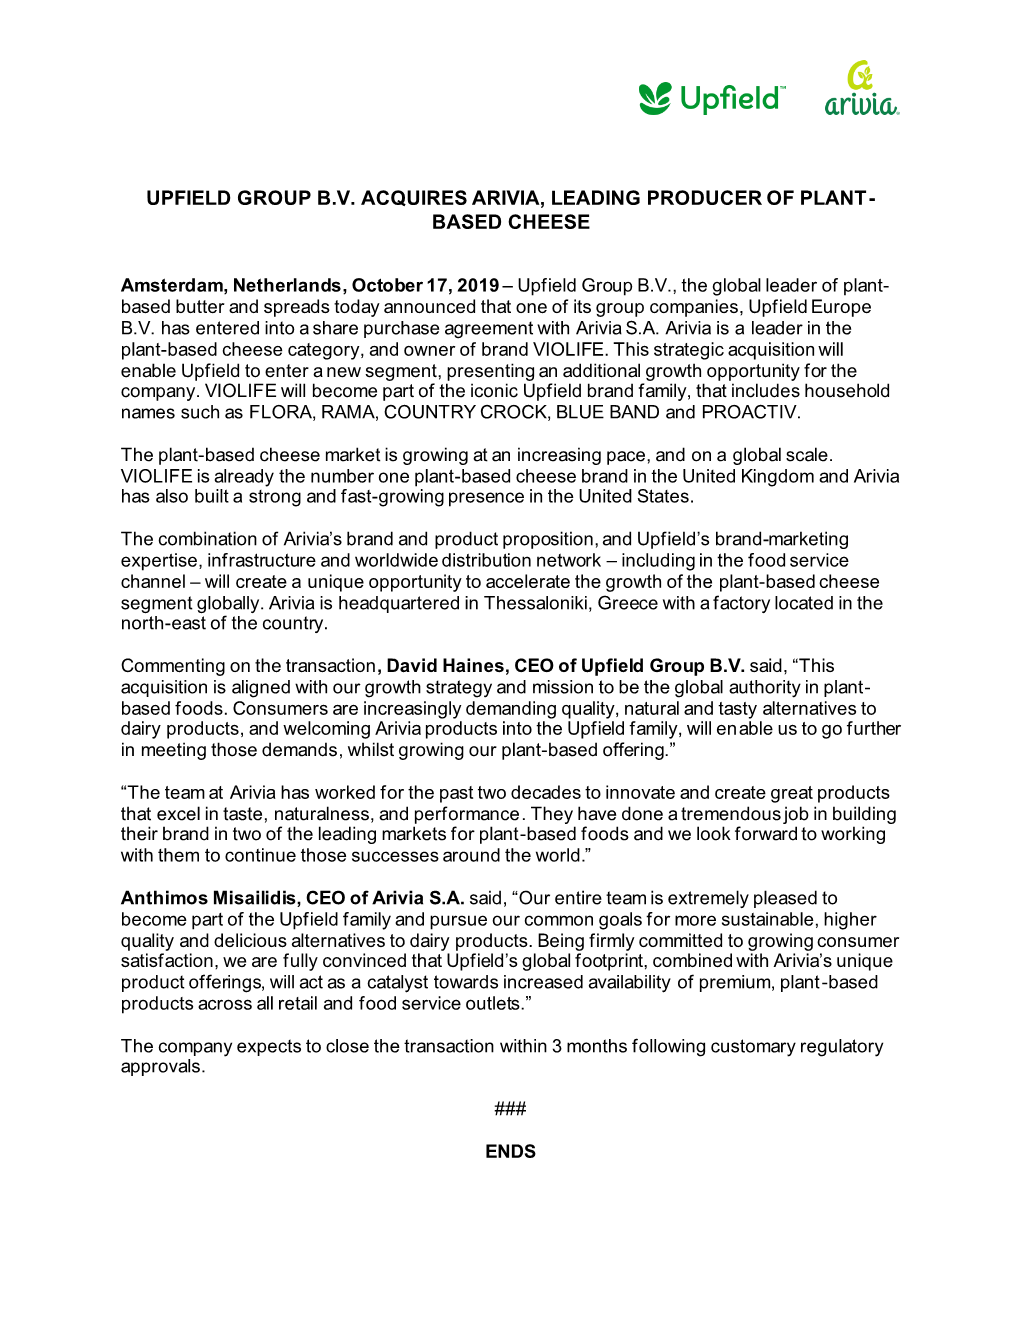 Upfield Group B.V. Acquires Arivia, Leading Producer of Plant- Based Cheese